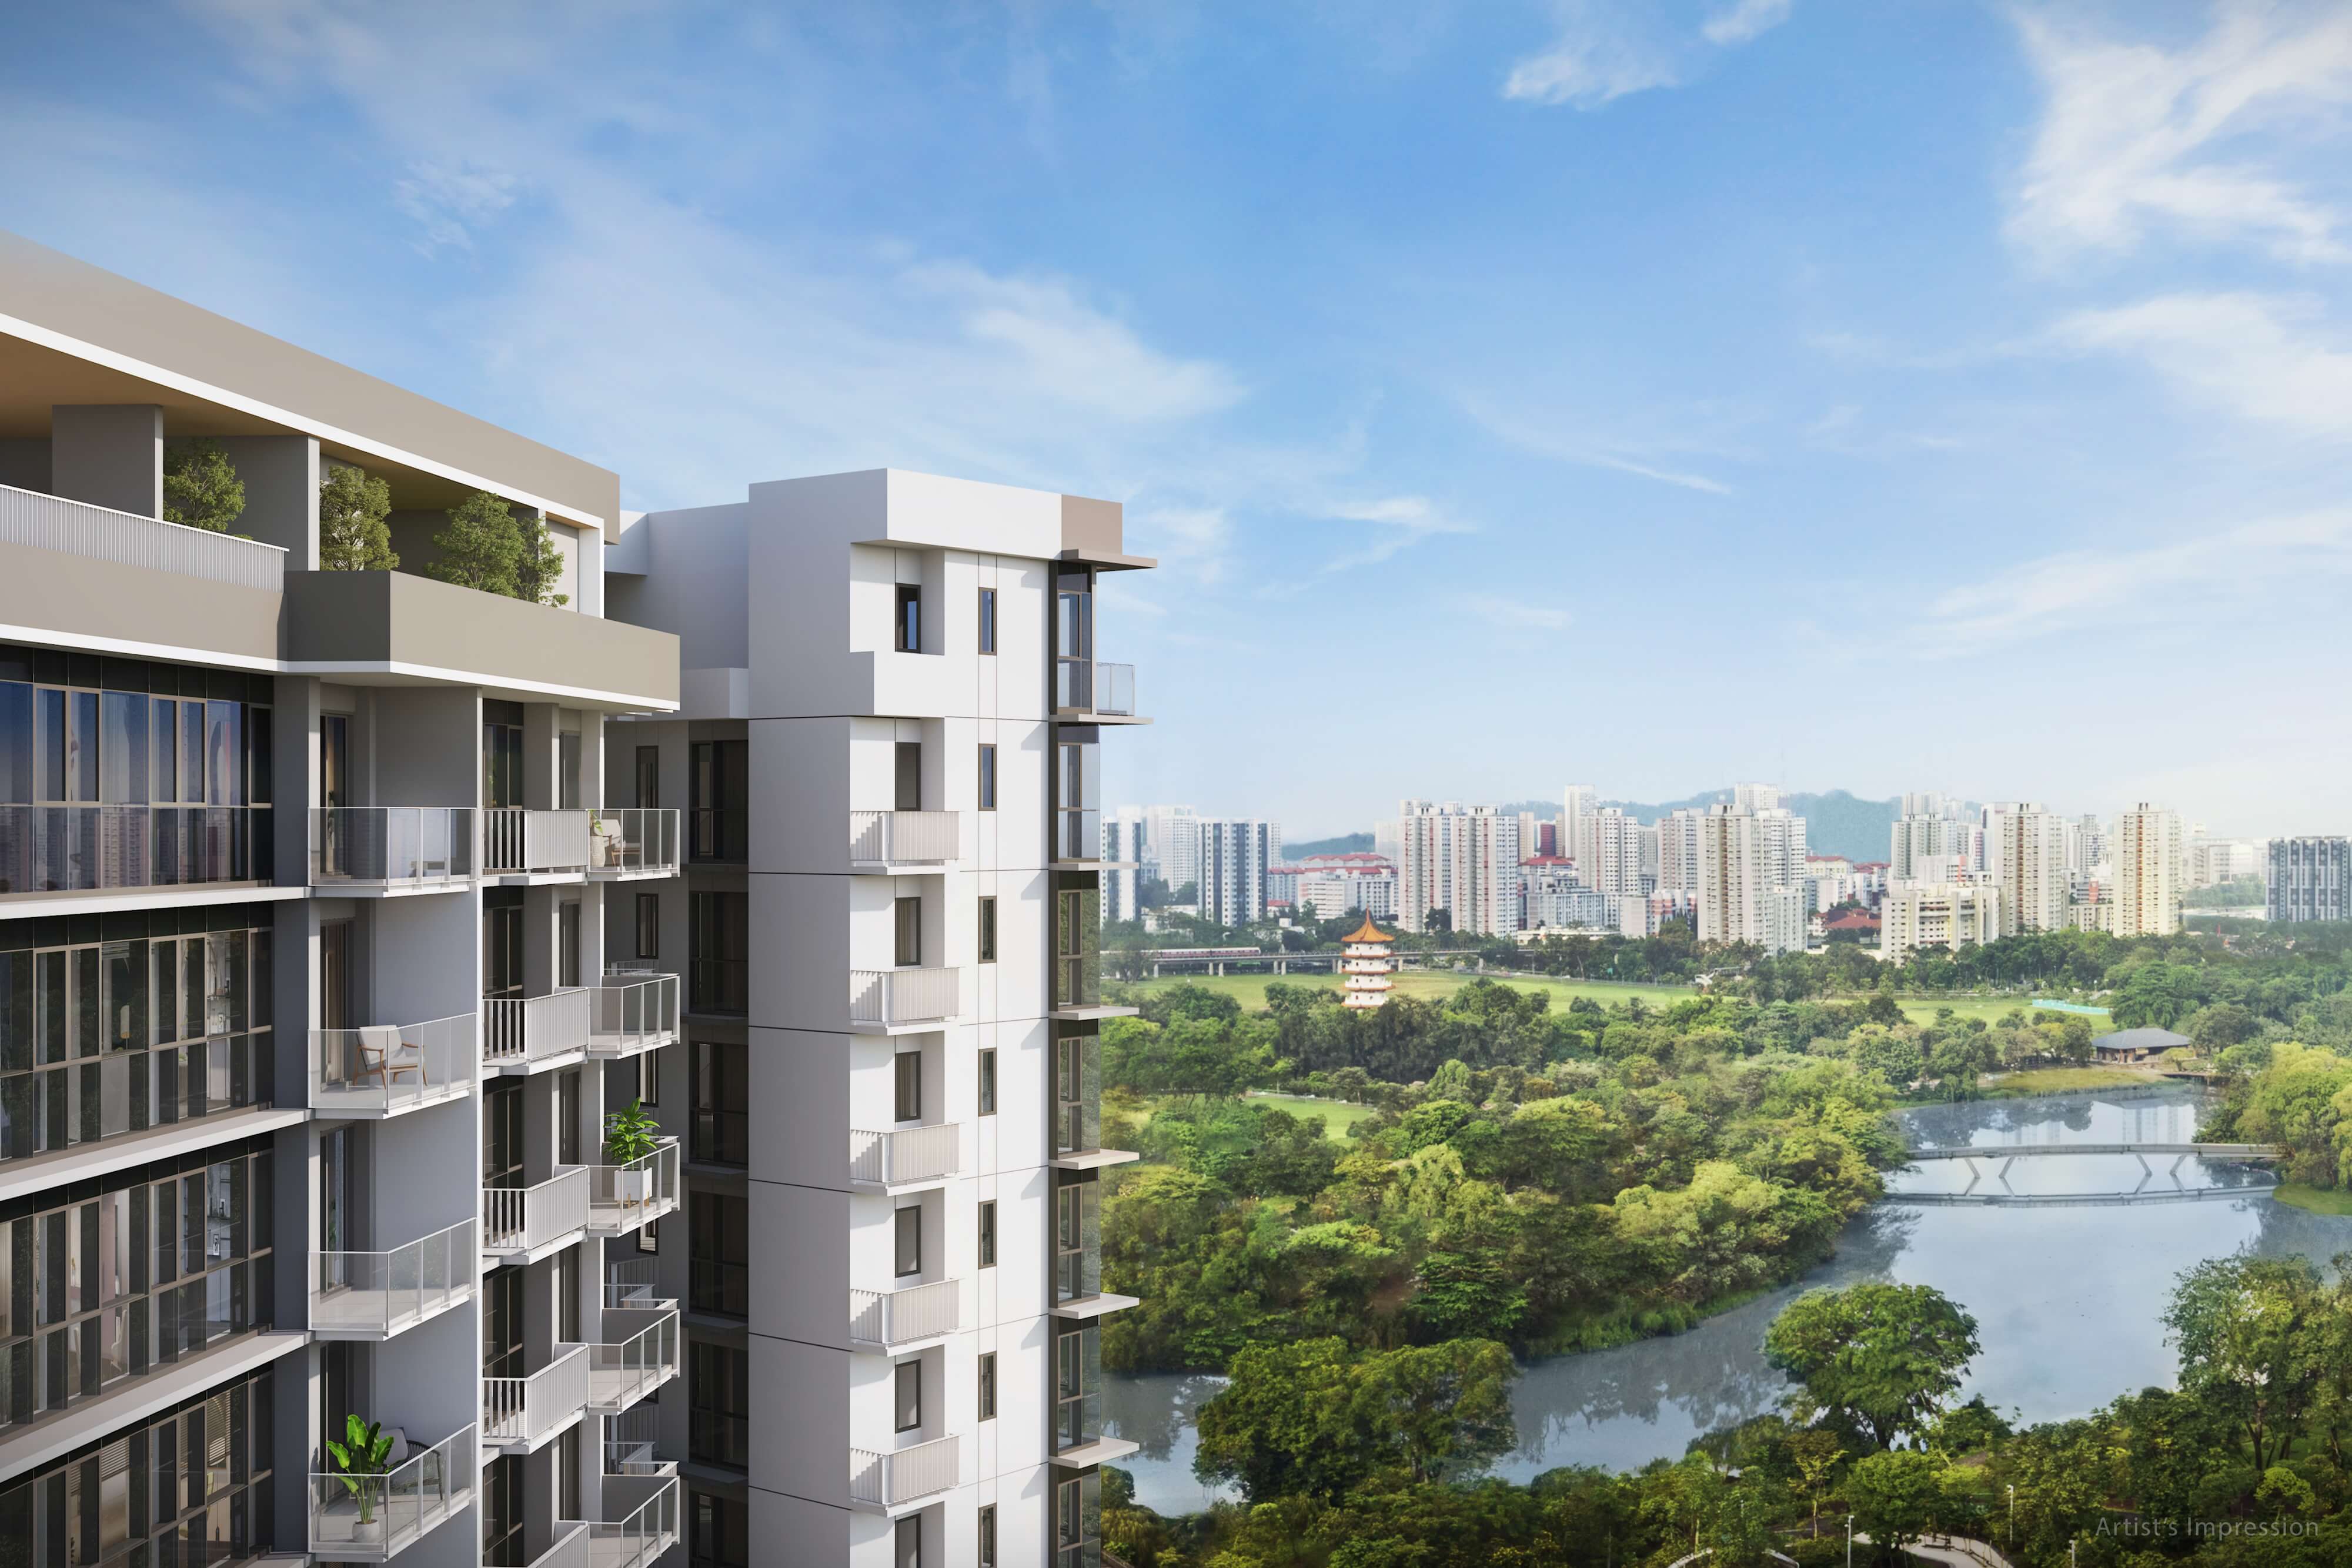 The LakeGarden Residences Overlooking Chinese Gardens